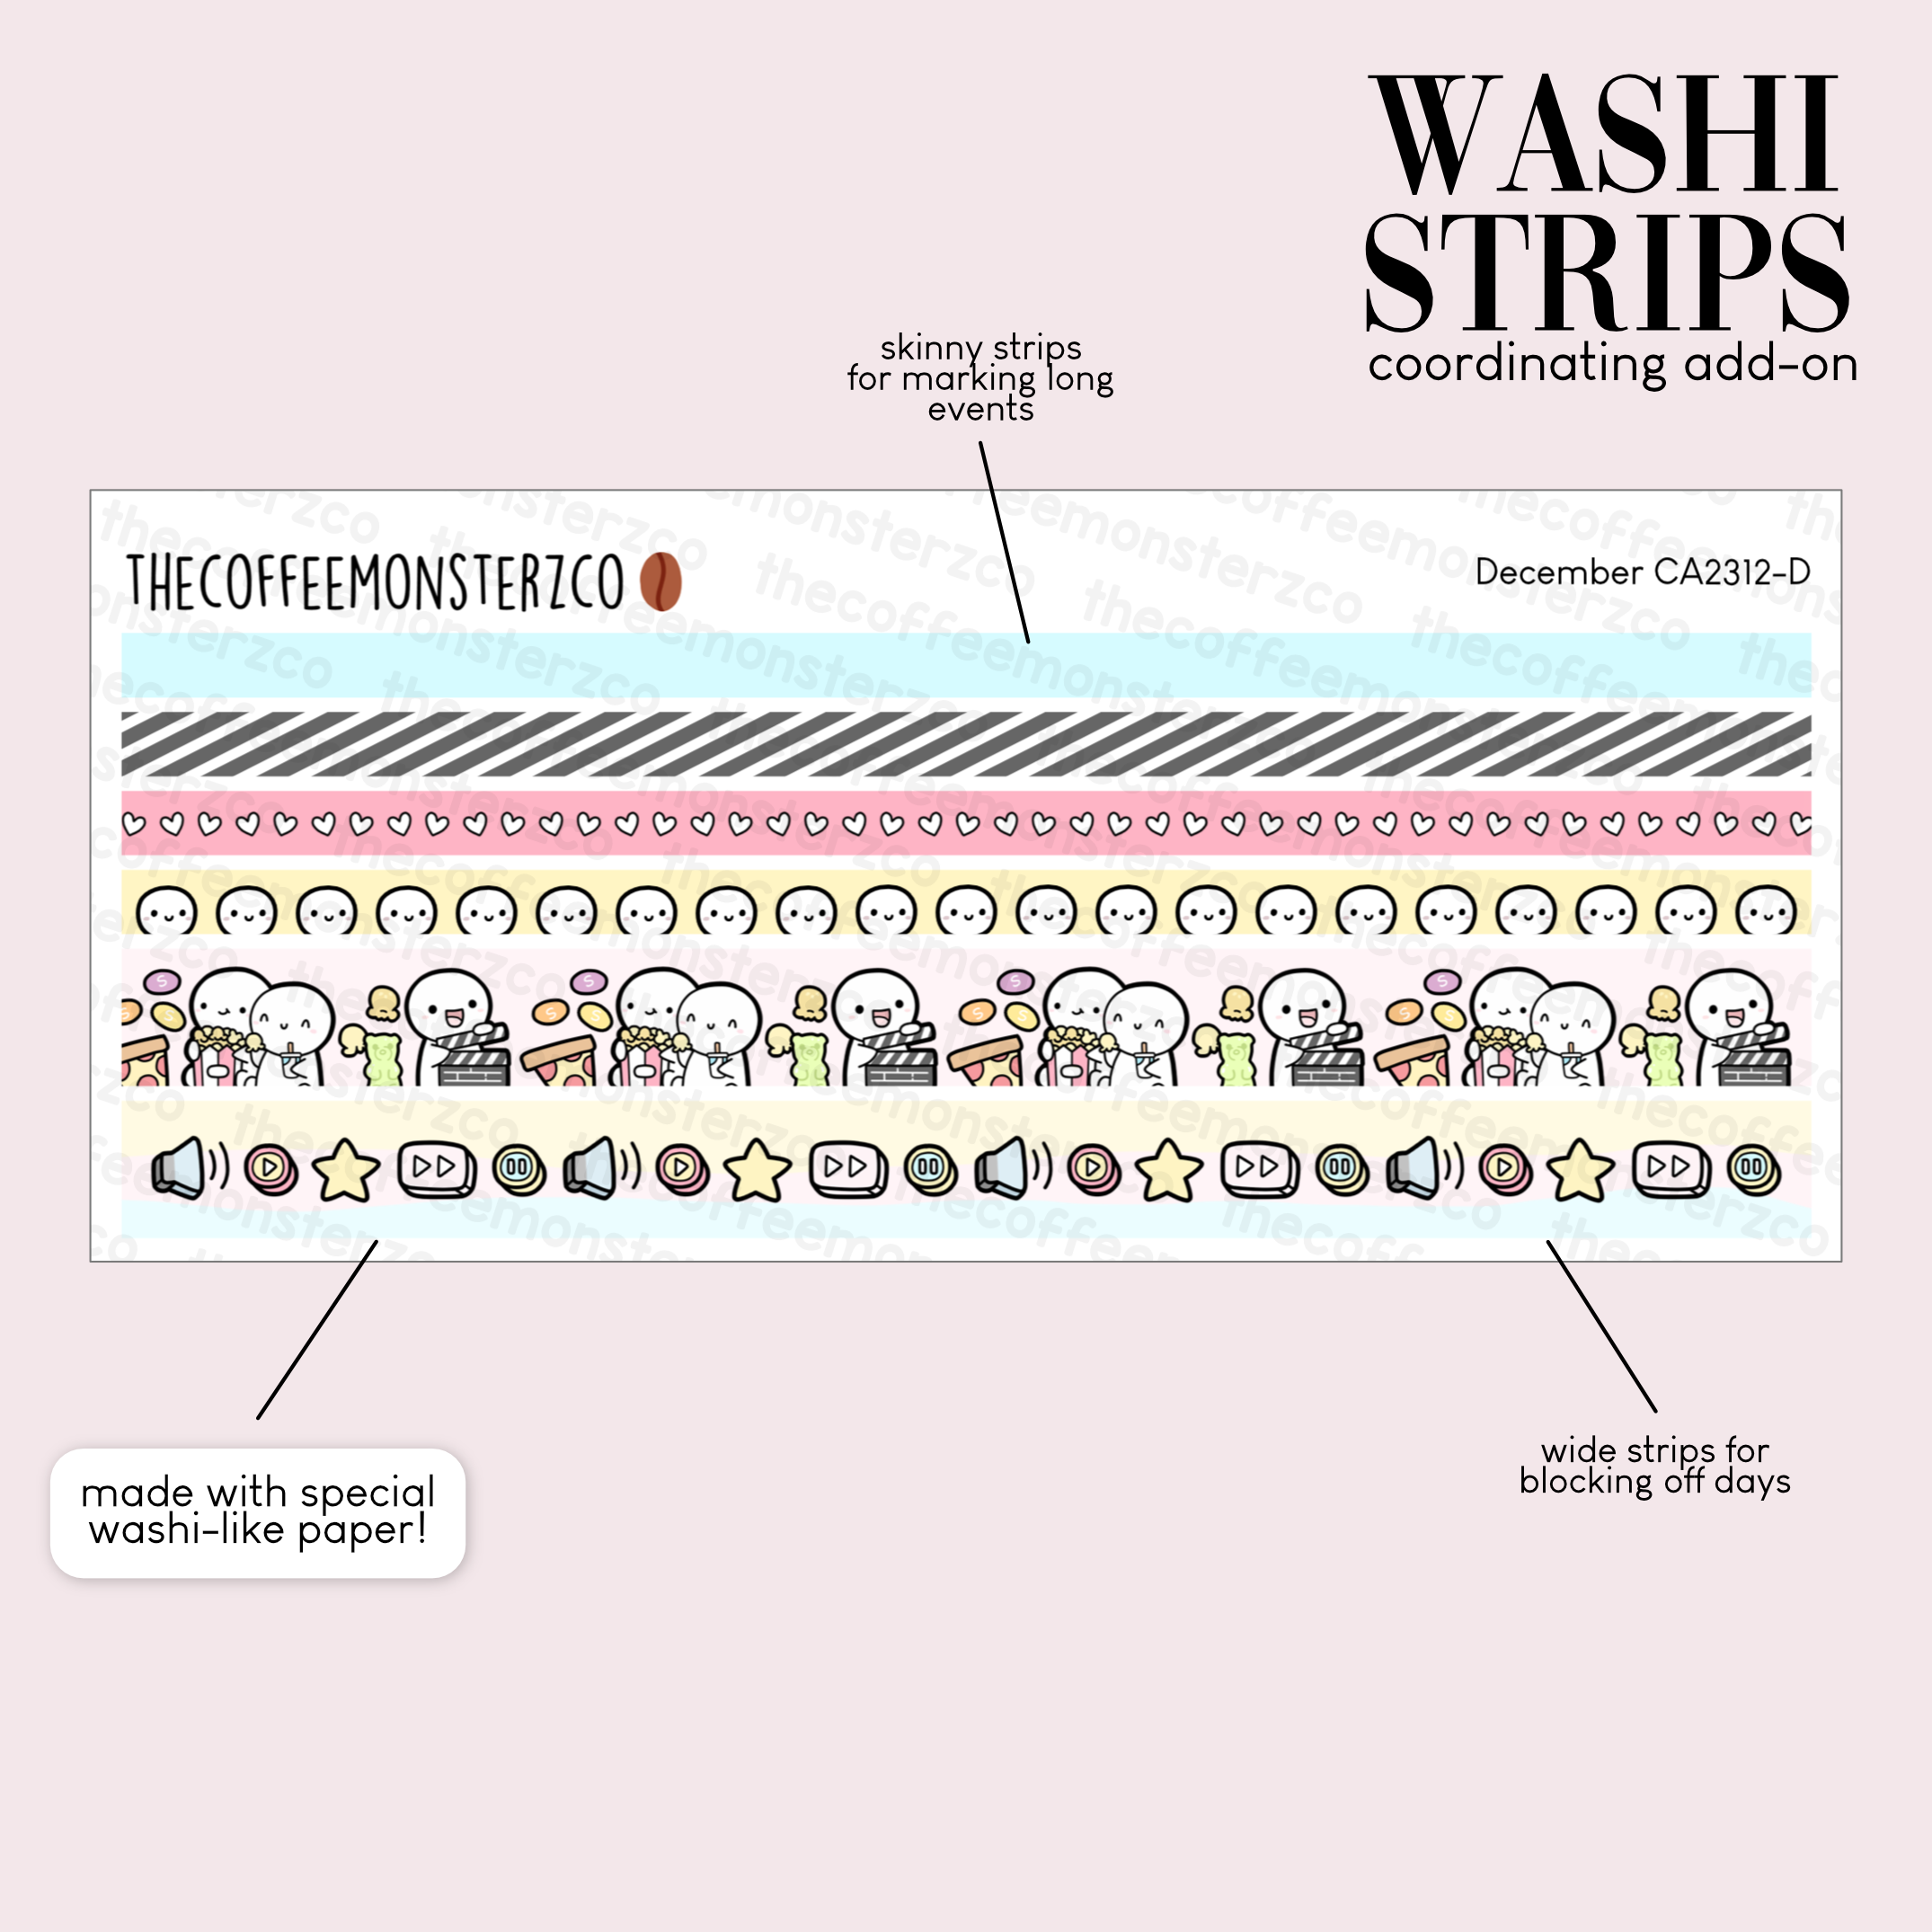 2023 Coordinating Add-ons - Washi Strips - Part 2